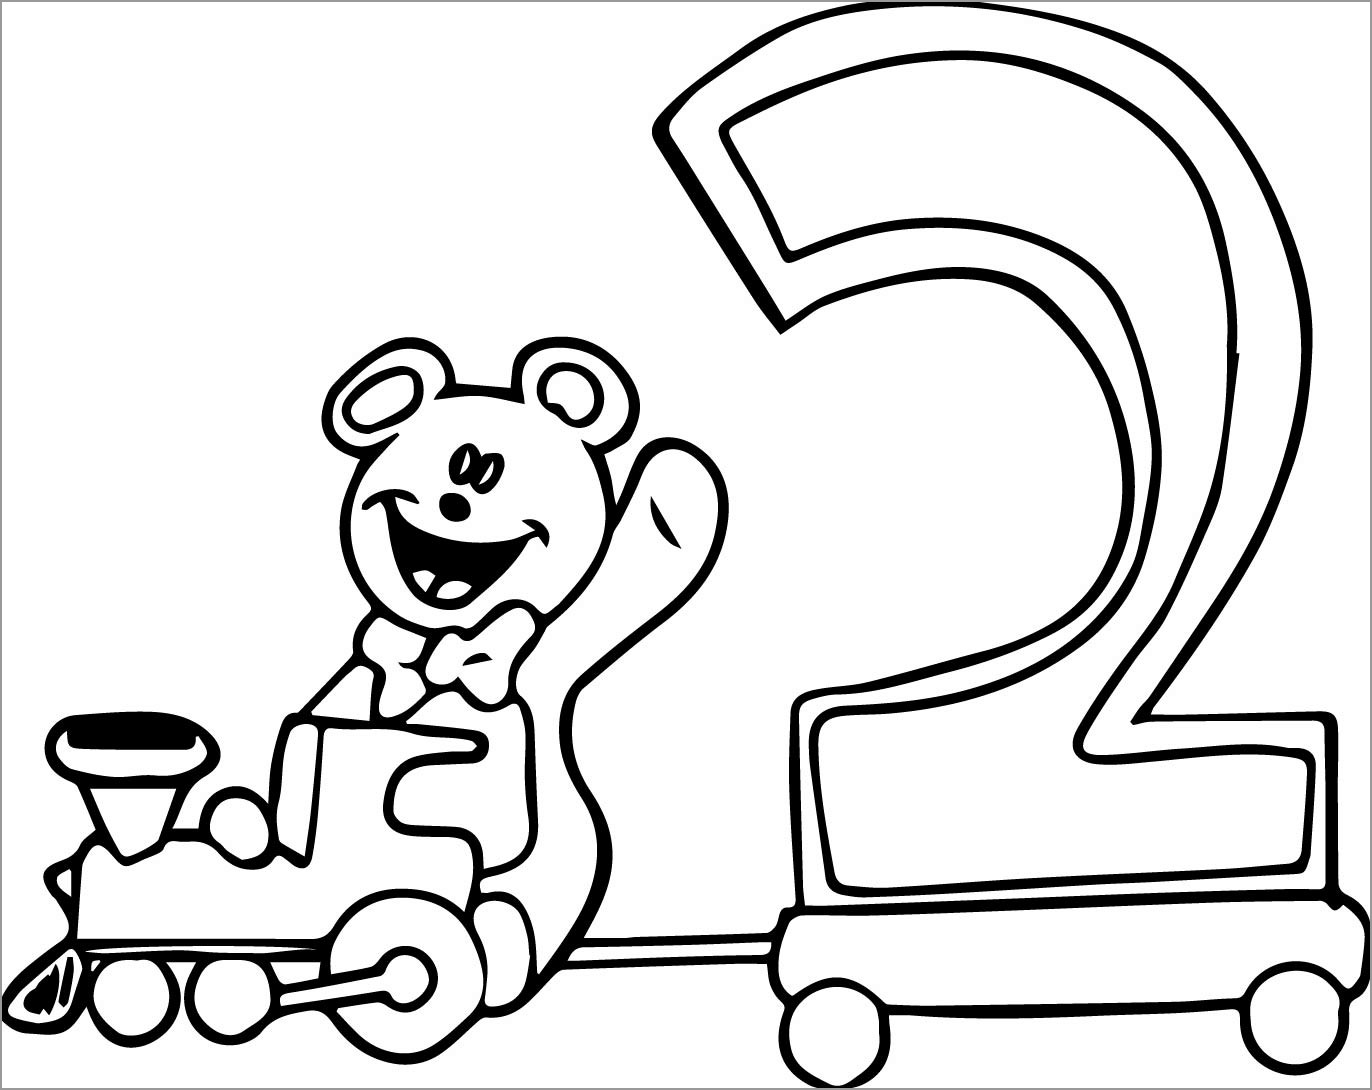 Number 2 Coloring Page for Kids